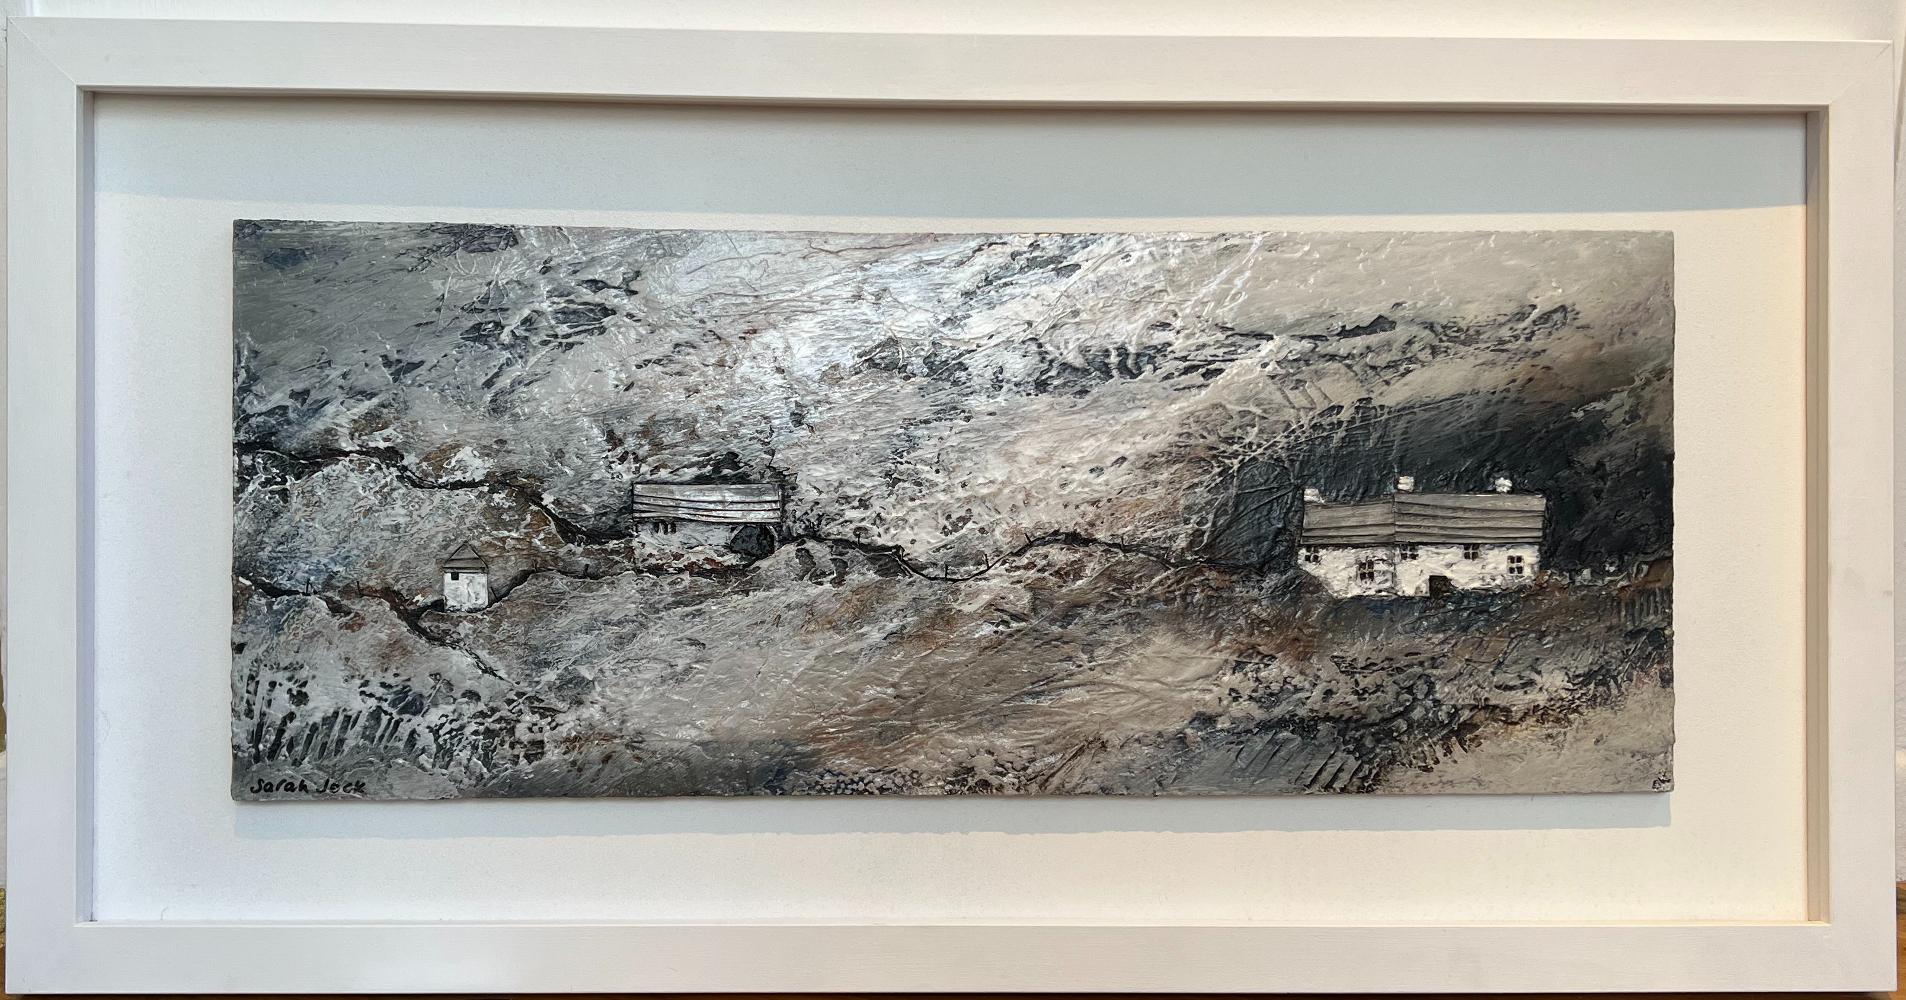 Caught in the Mist - Brooding British Landscape / Framed Mixed Media on Board - Contemporary Mixed Media Art by Sarah Jack